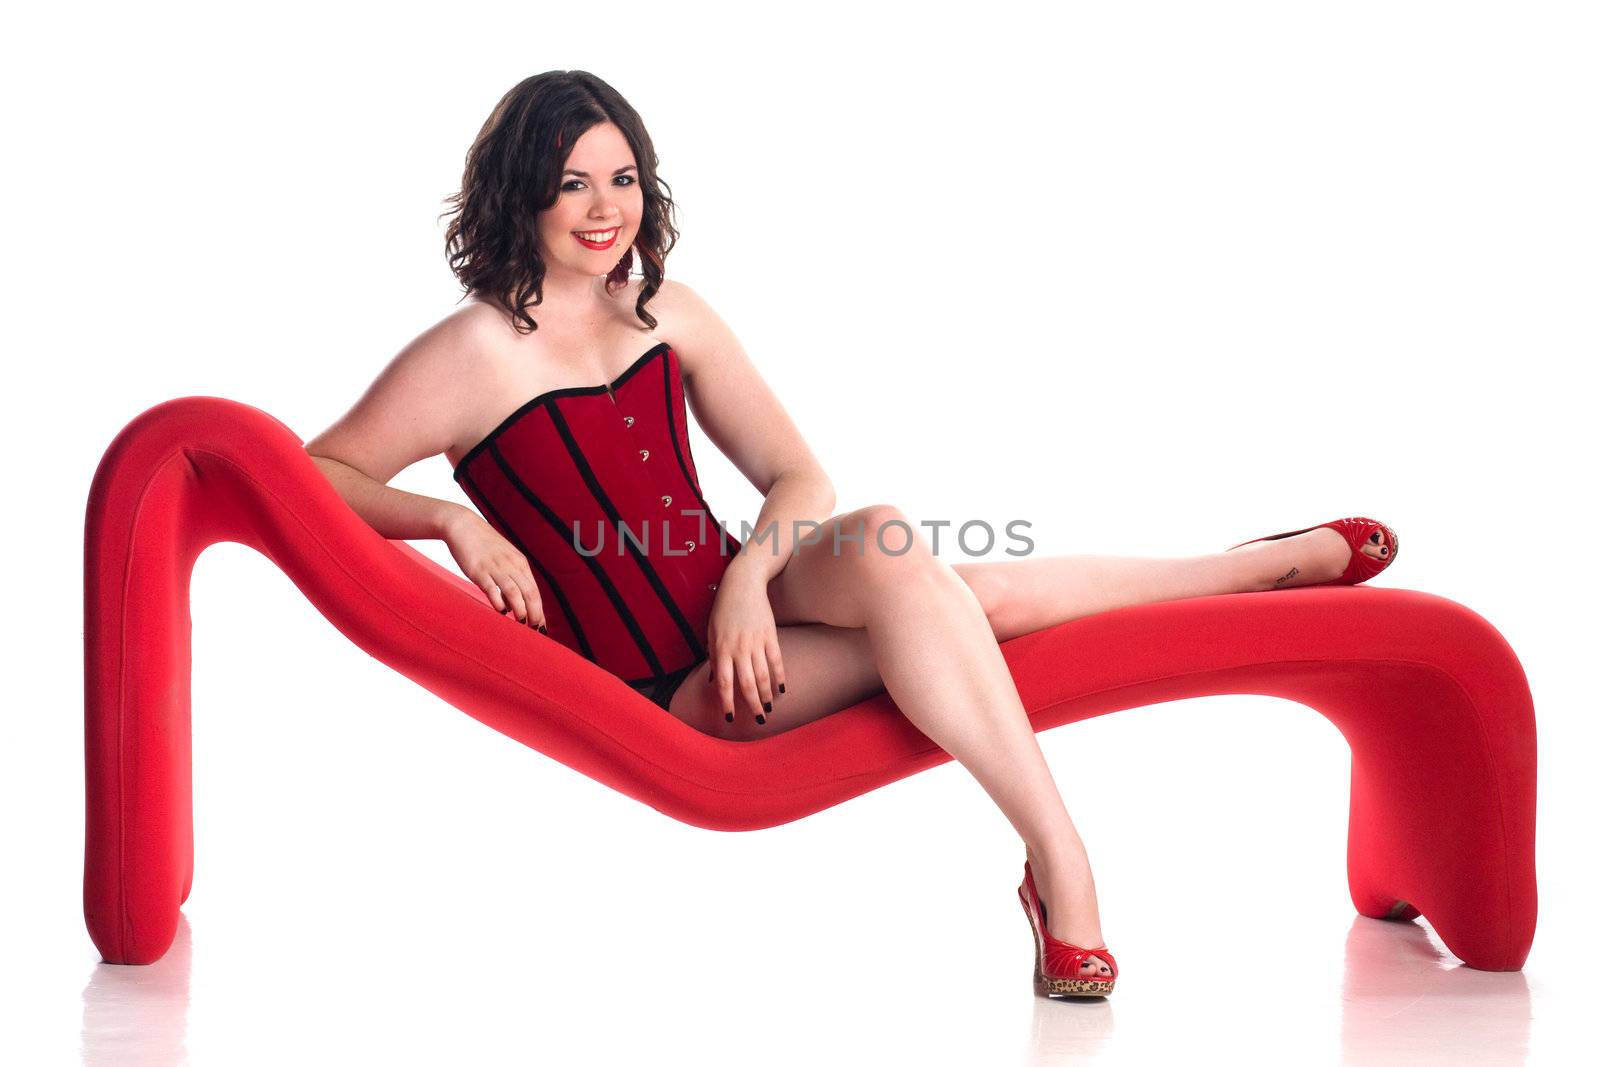 Cute girl in pin-up pose on red couch by krazeedrocks